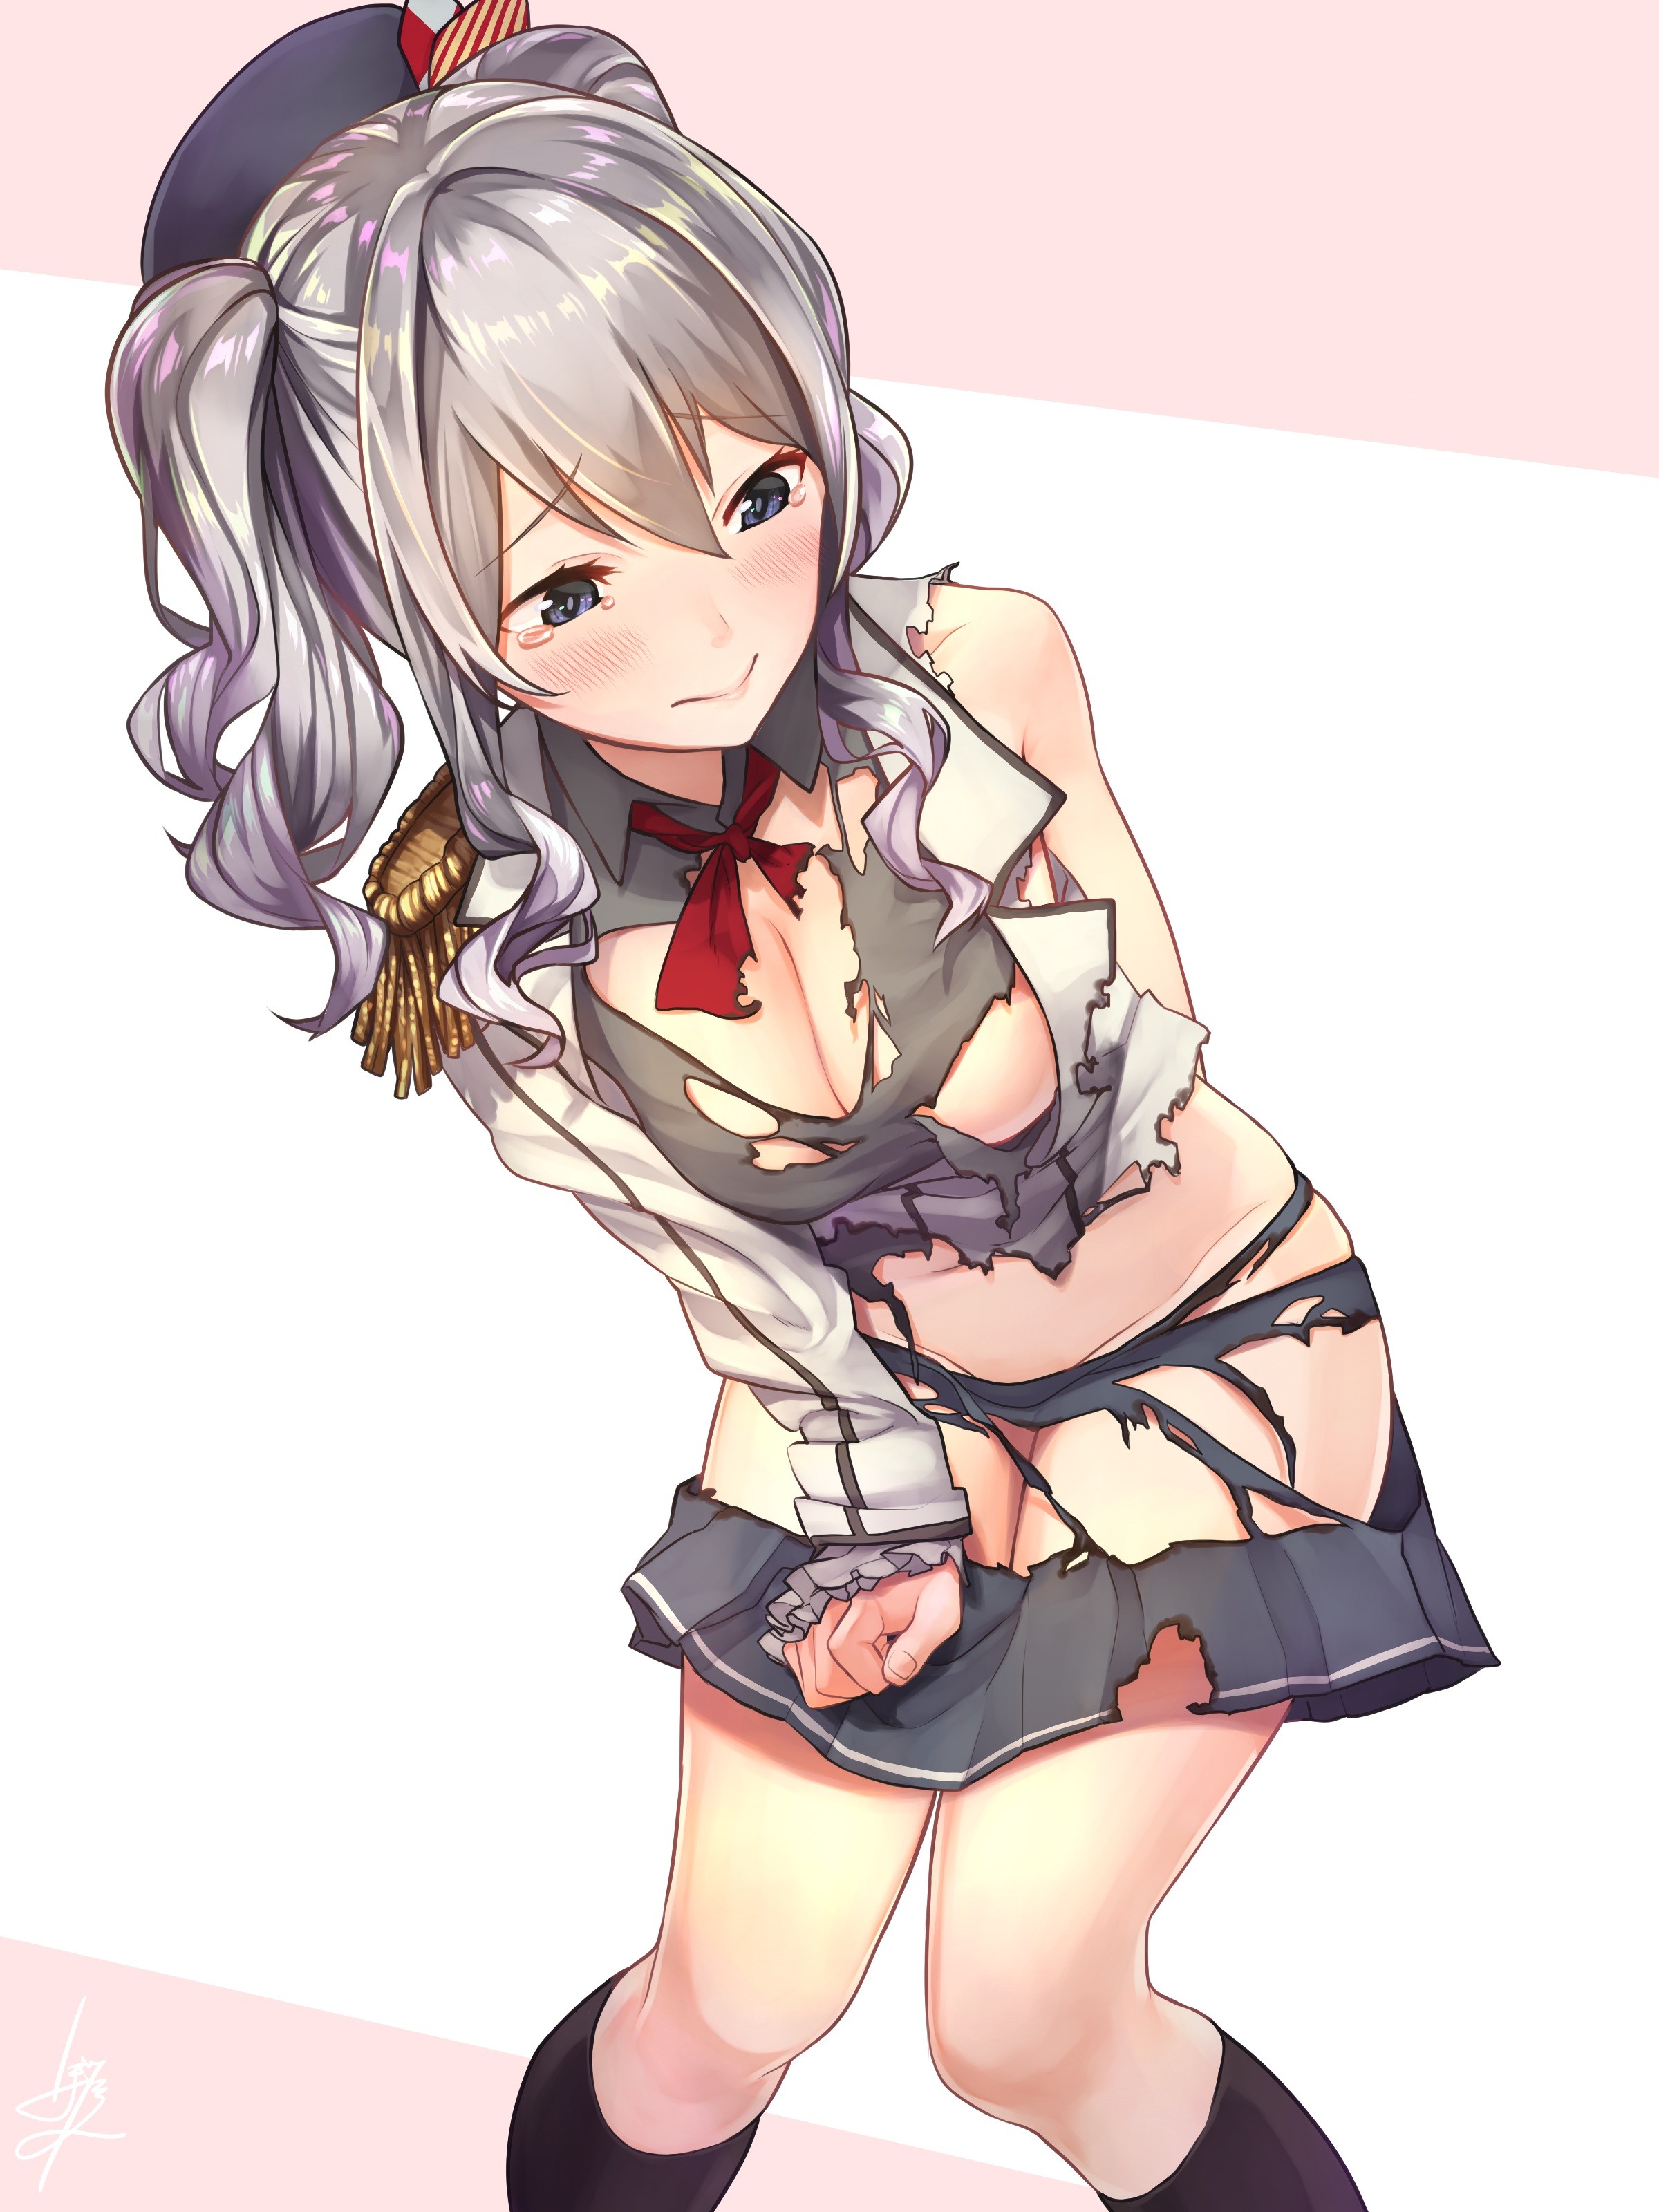 Anime 2400x3200 anime anime girls Kantai Collection Kashima (KanColle) cleavage no bra nopan torn clothes uniform big boobs silver hair twintails blue eyes thighs strategic covering torn shirt tears looking sideways embarrassed hat Pixiv